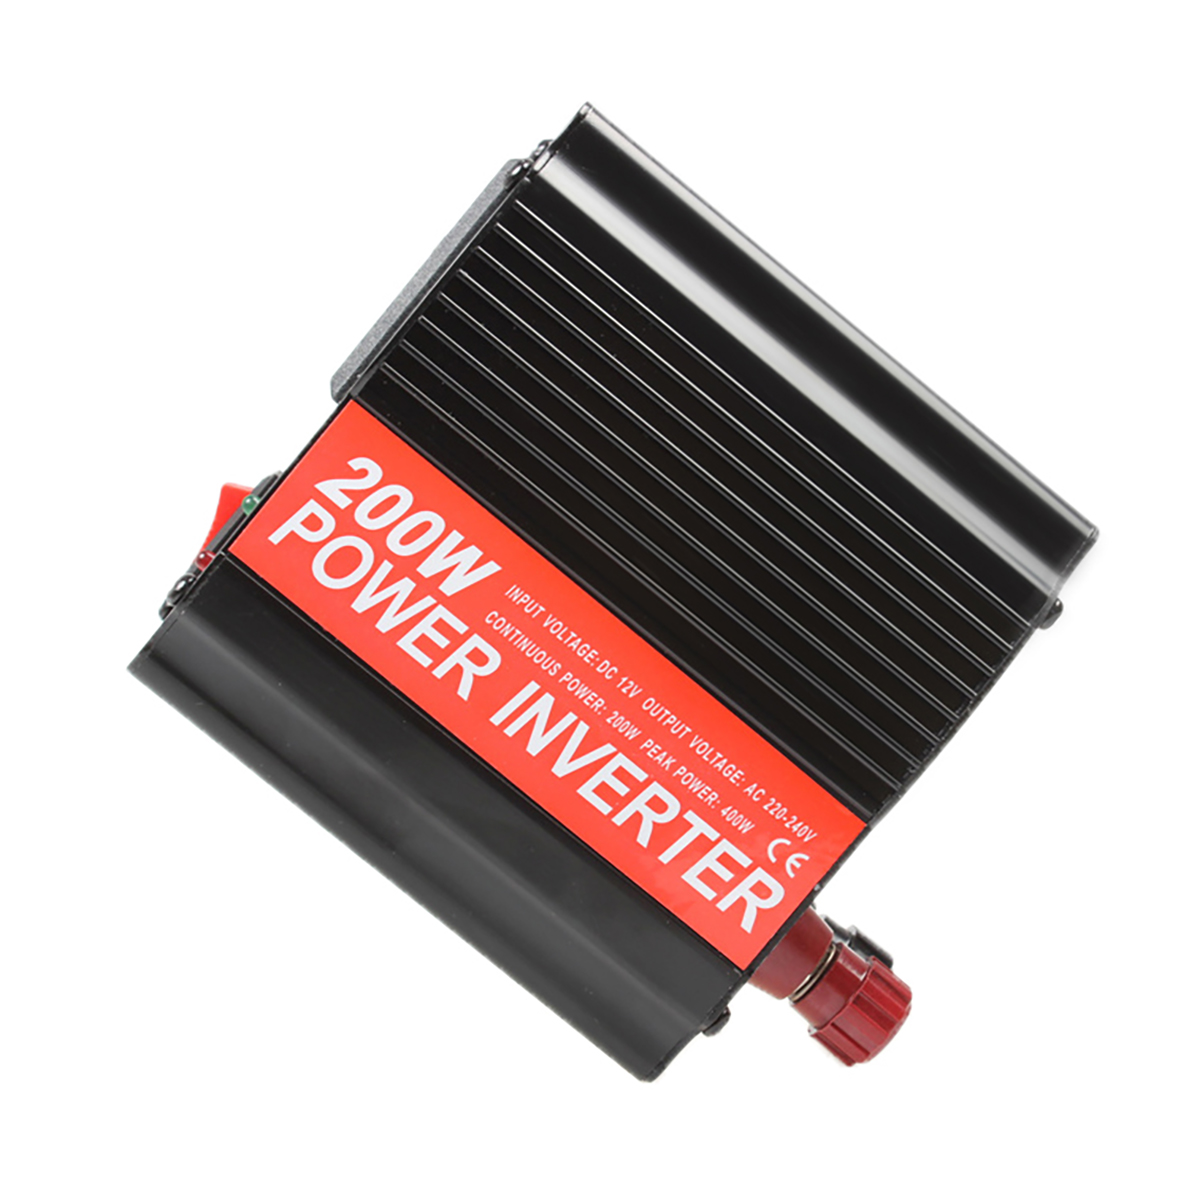 200W Car Inverter Al-Mg Alloy USB 5V/3.1A 12V to 110V Peak 300W Travel Essential for US Japan